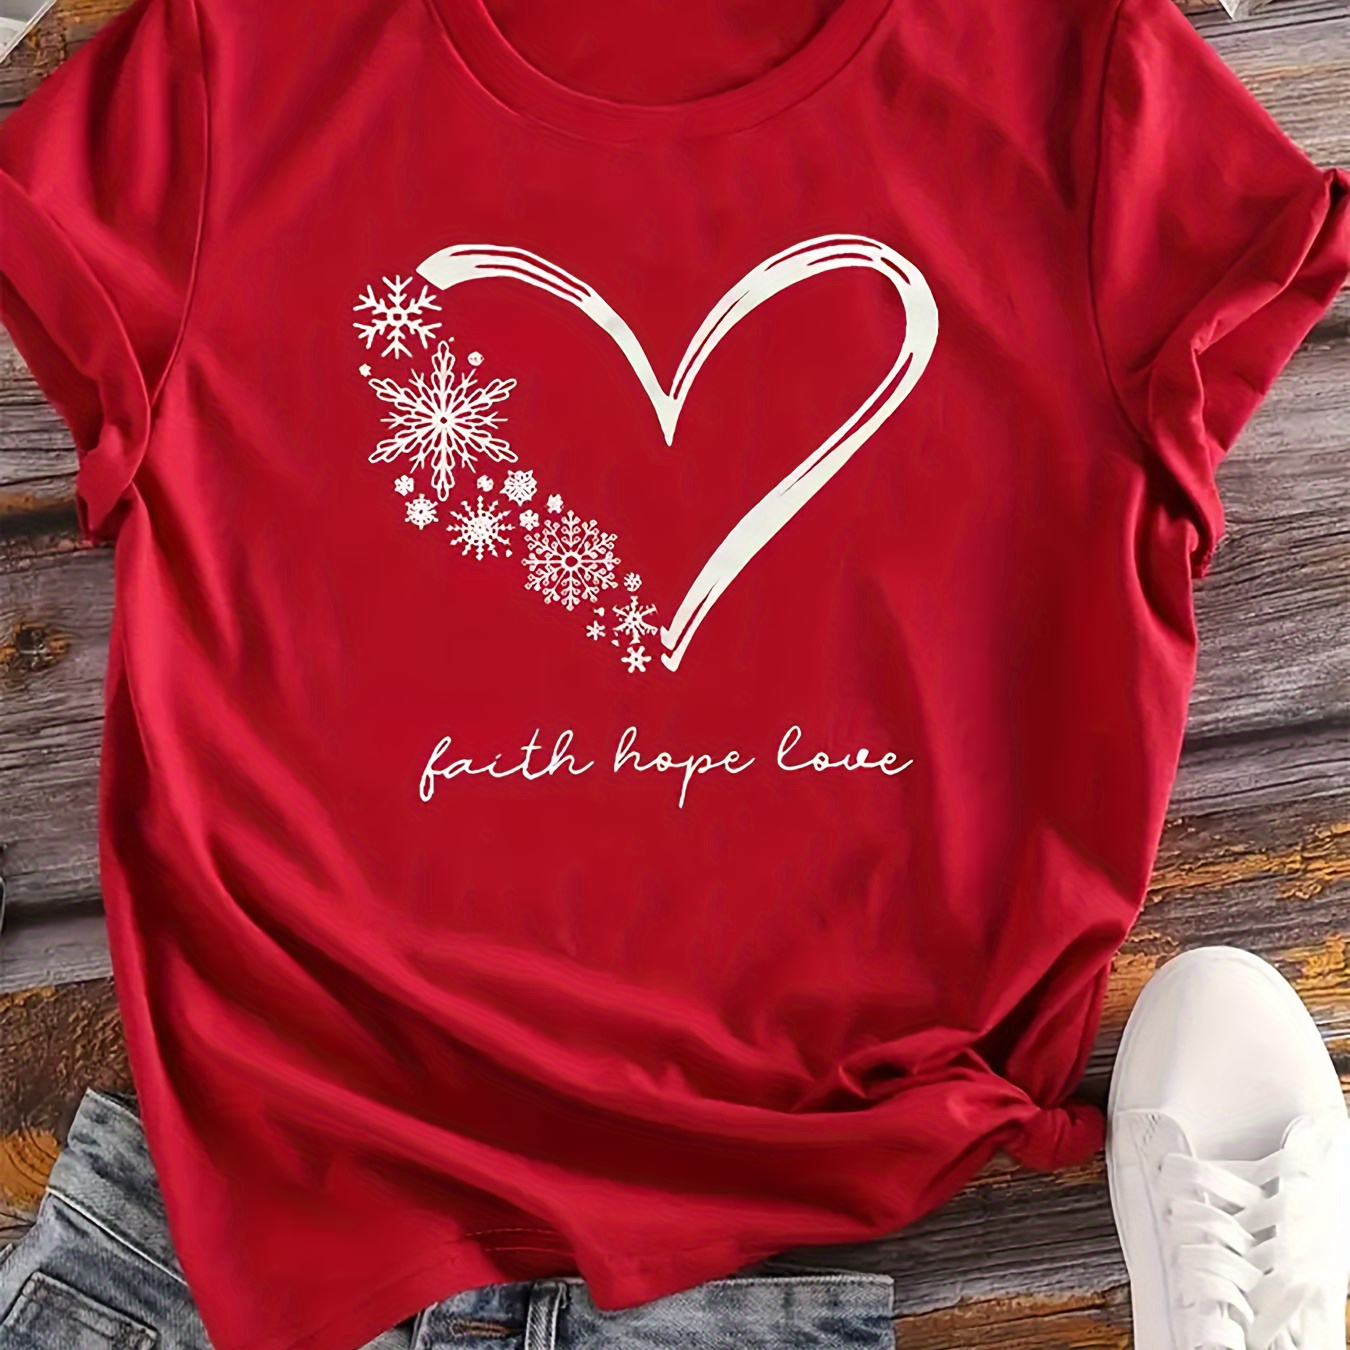 

Plus Size Faith Hope Love Print T-shirt, Short Sleeve Crew Neck Casual Top For Summer & Spring, Women's Plus Size Clothing